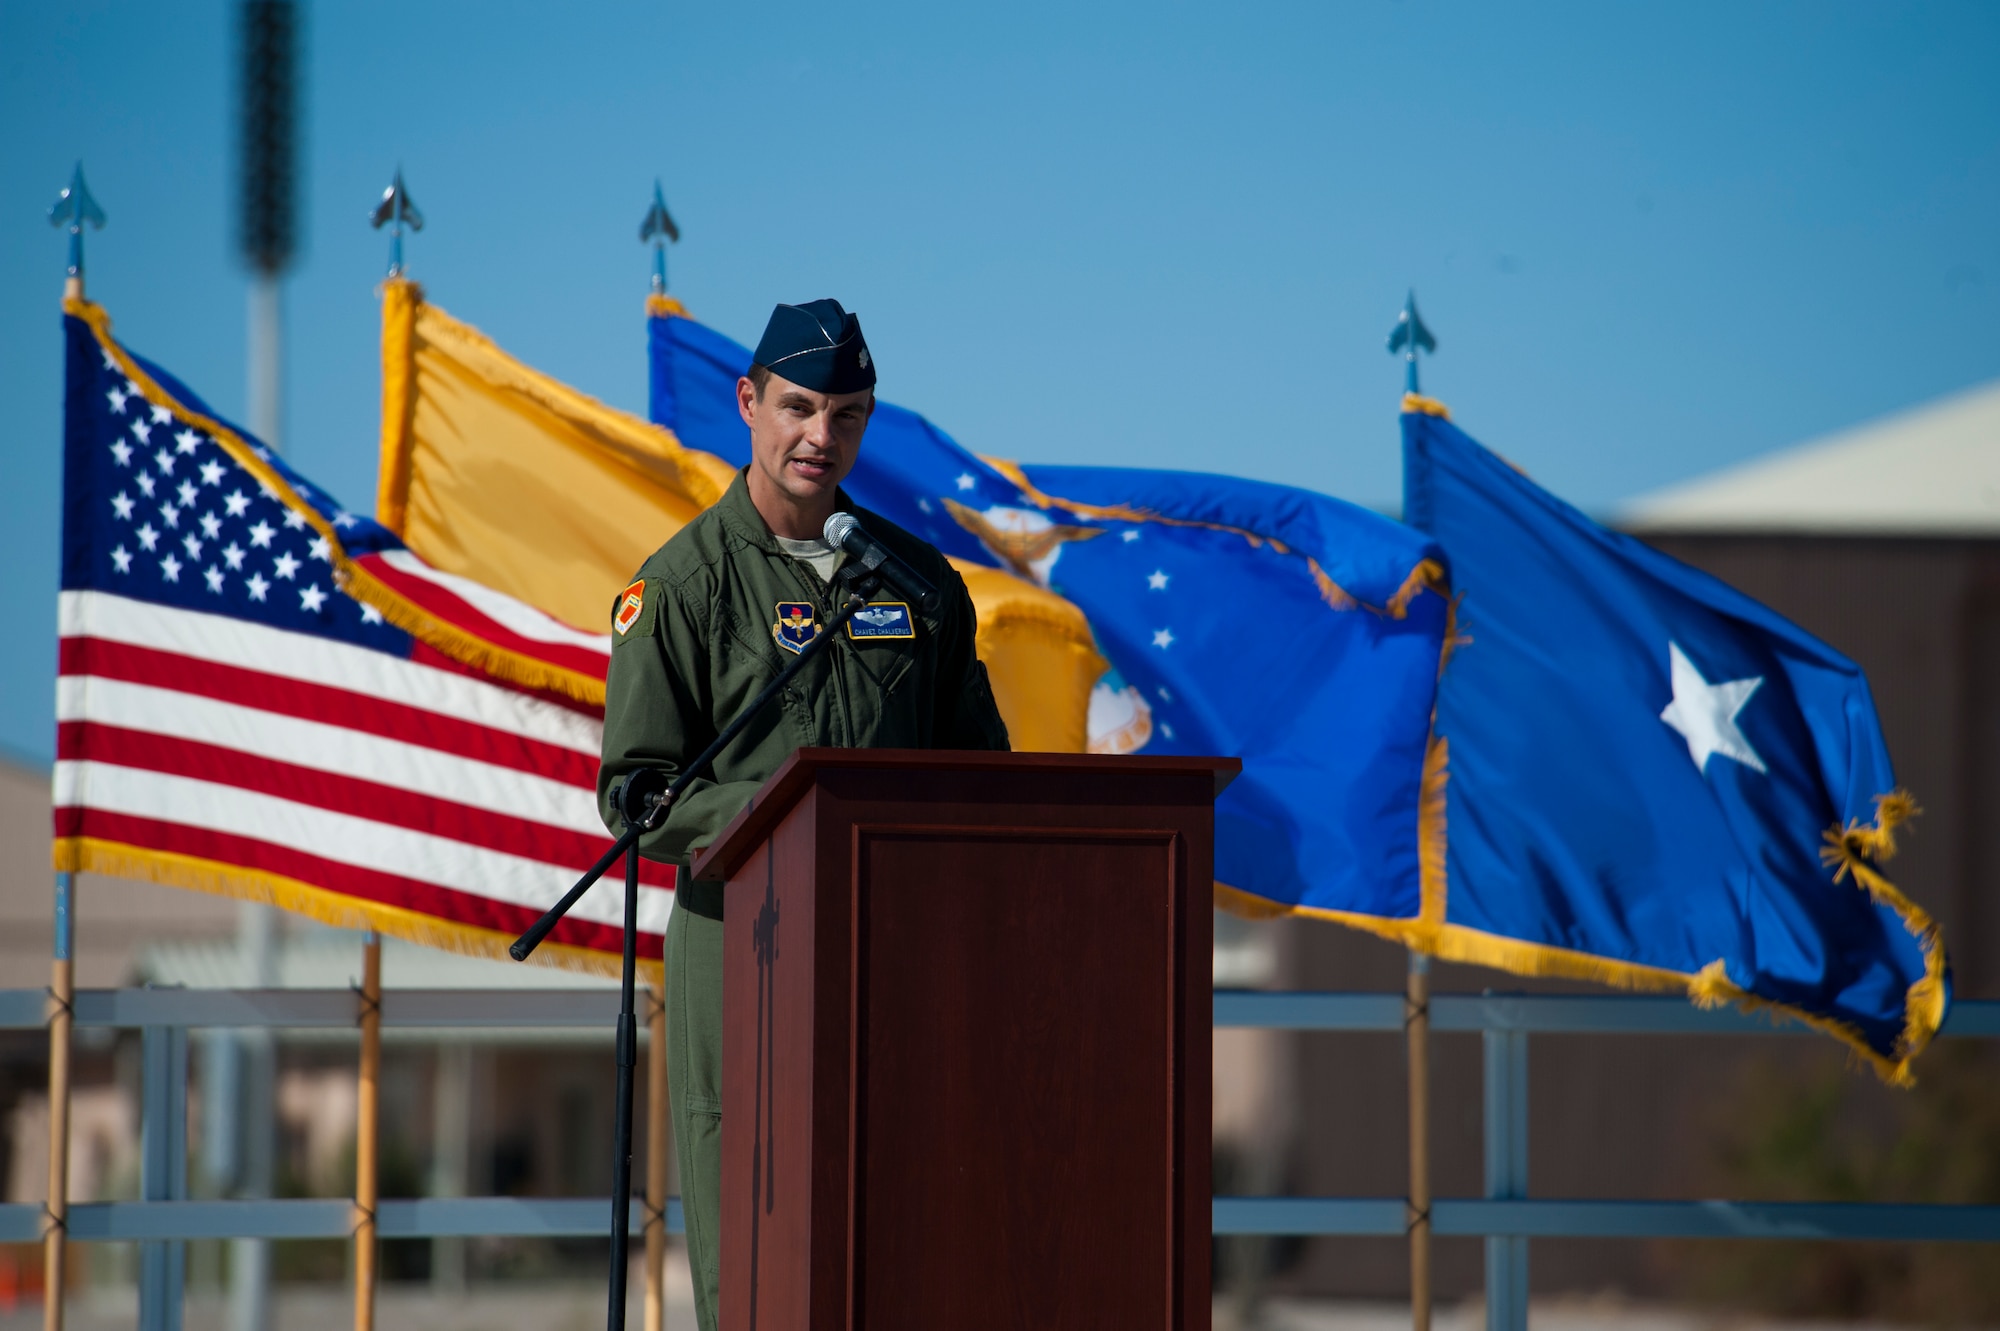 Lieutenant Col. Marshall Chalverus, 54th Operation Support Squadron commander, delivers a speech during the 54th Fighter Group activation at Holloman Air Force Base, N.M., March 11. The 54th Fighter Group, a tenant unit at Holloman, is a detachment the 56th Fighter Wing at Luke Air Force Base, Ariz., and will ultimately operate two F-16 Fighting Falcon aircraft training squadrons. The 54th Fighter Group plus three squadrons were activated at the ceremony: the 311th Fighter Squadron, the 54th Operations Support Squadron and the 54th Aircraft Maintenance Squadron. (U.S. Air Force photo by Airman 1st Class Aaron Montoya / Released)